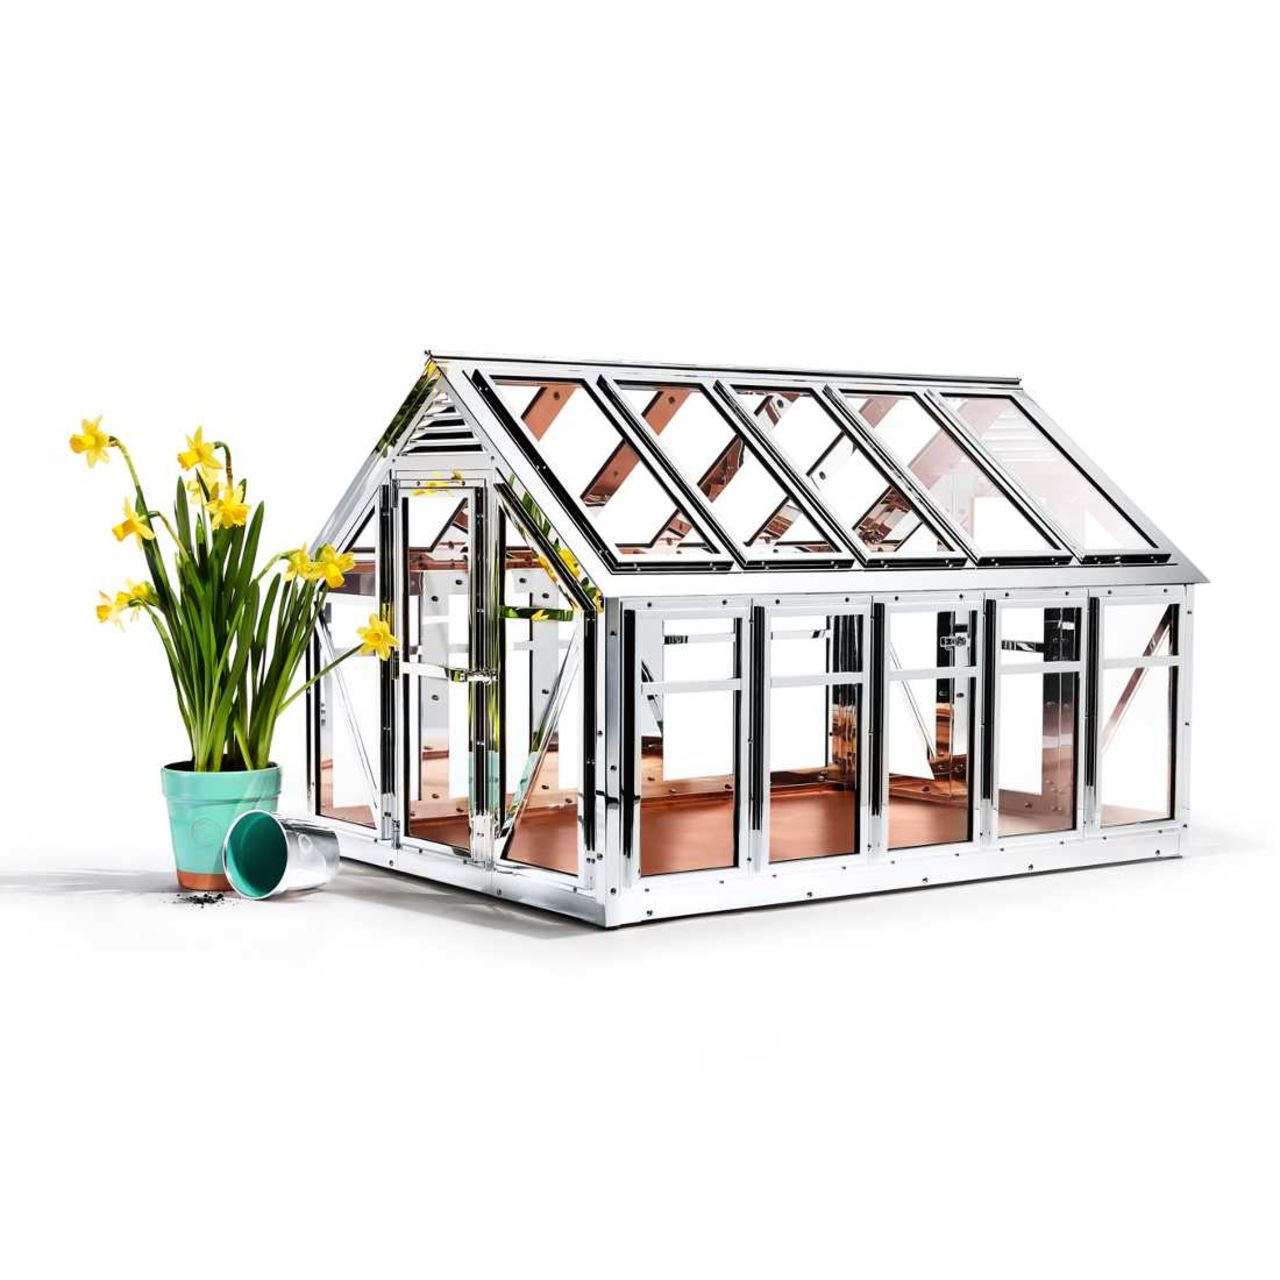 Tiffany sterling silver greenhouse